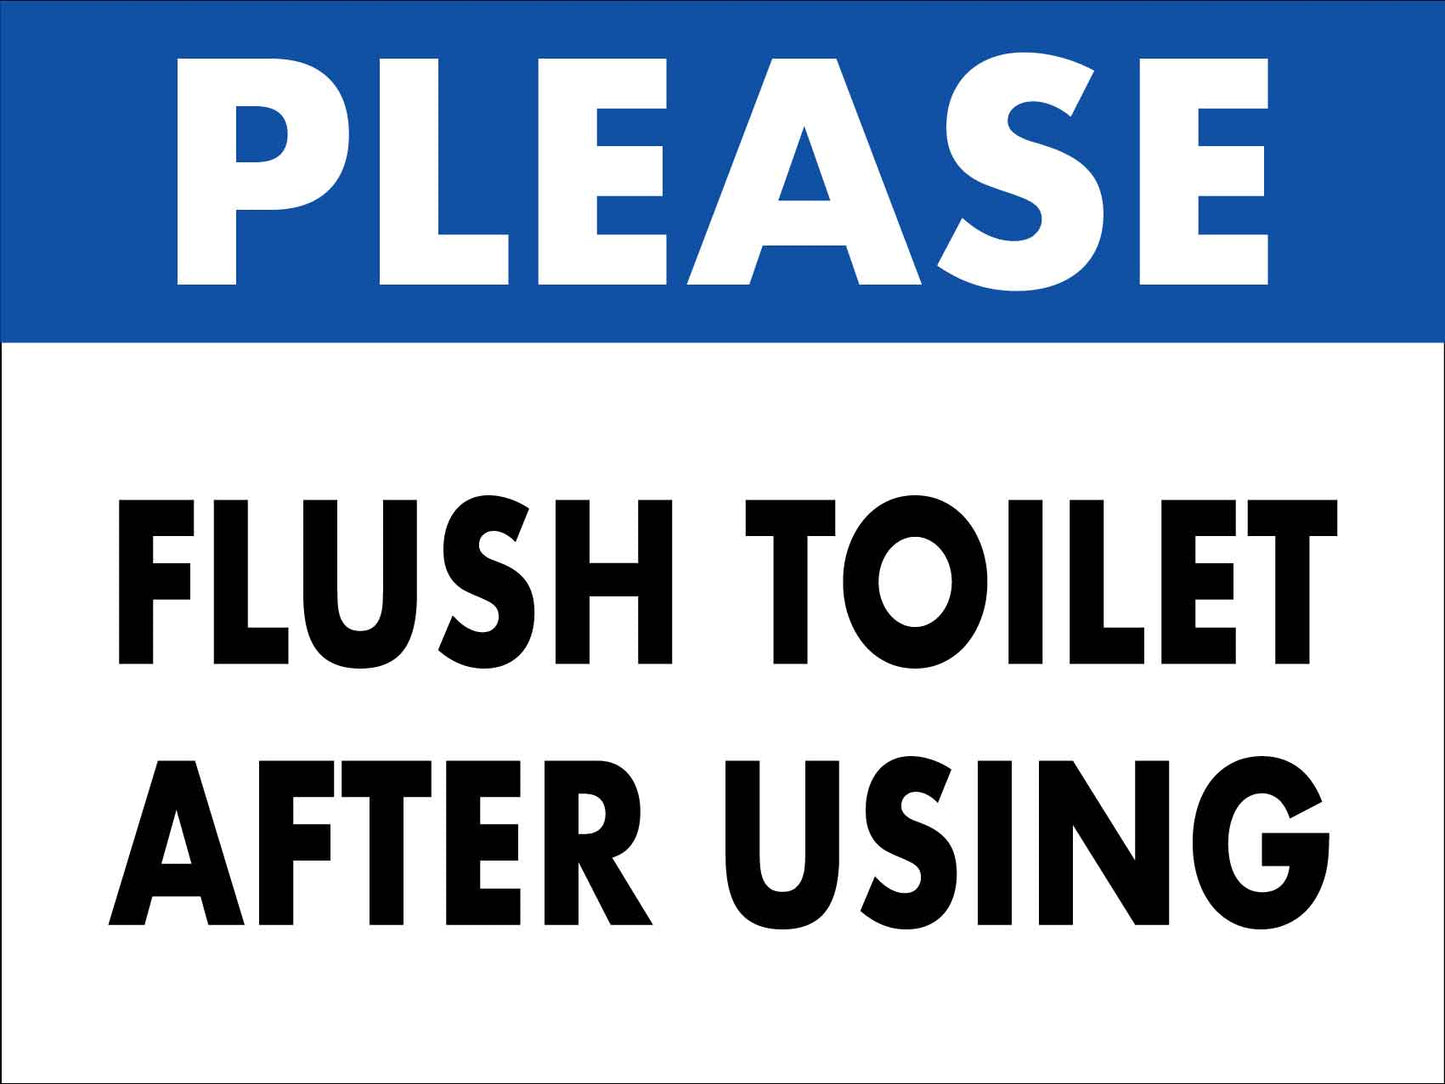 Please Flush Toilet After Using Sign